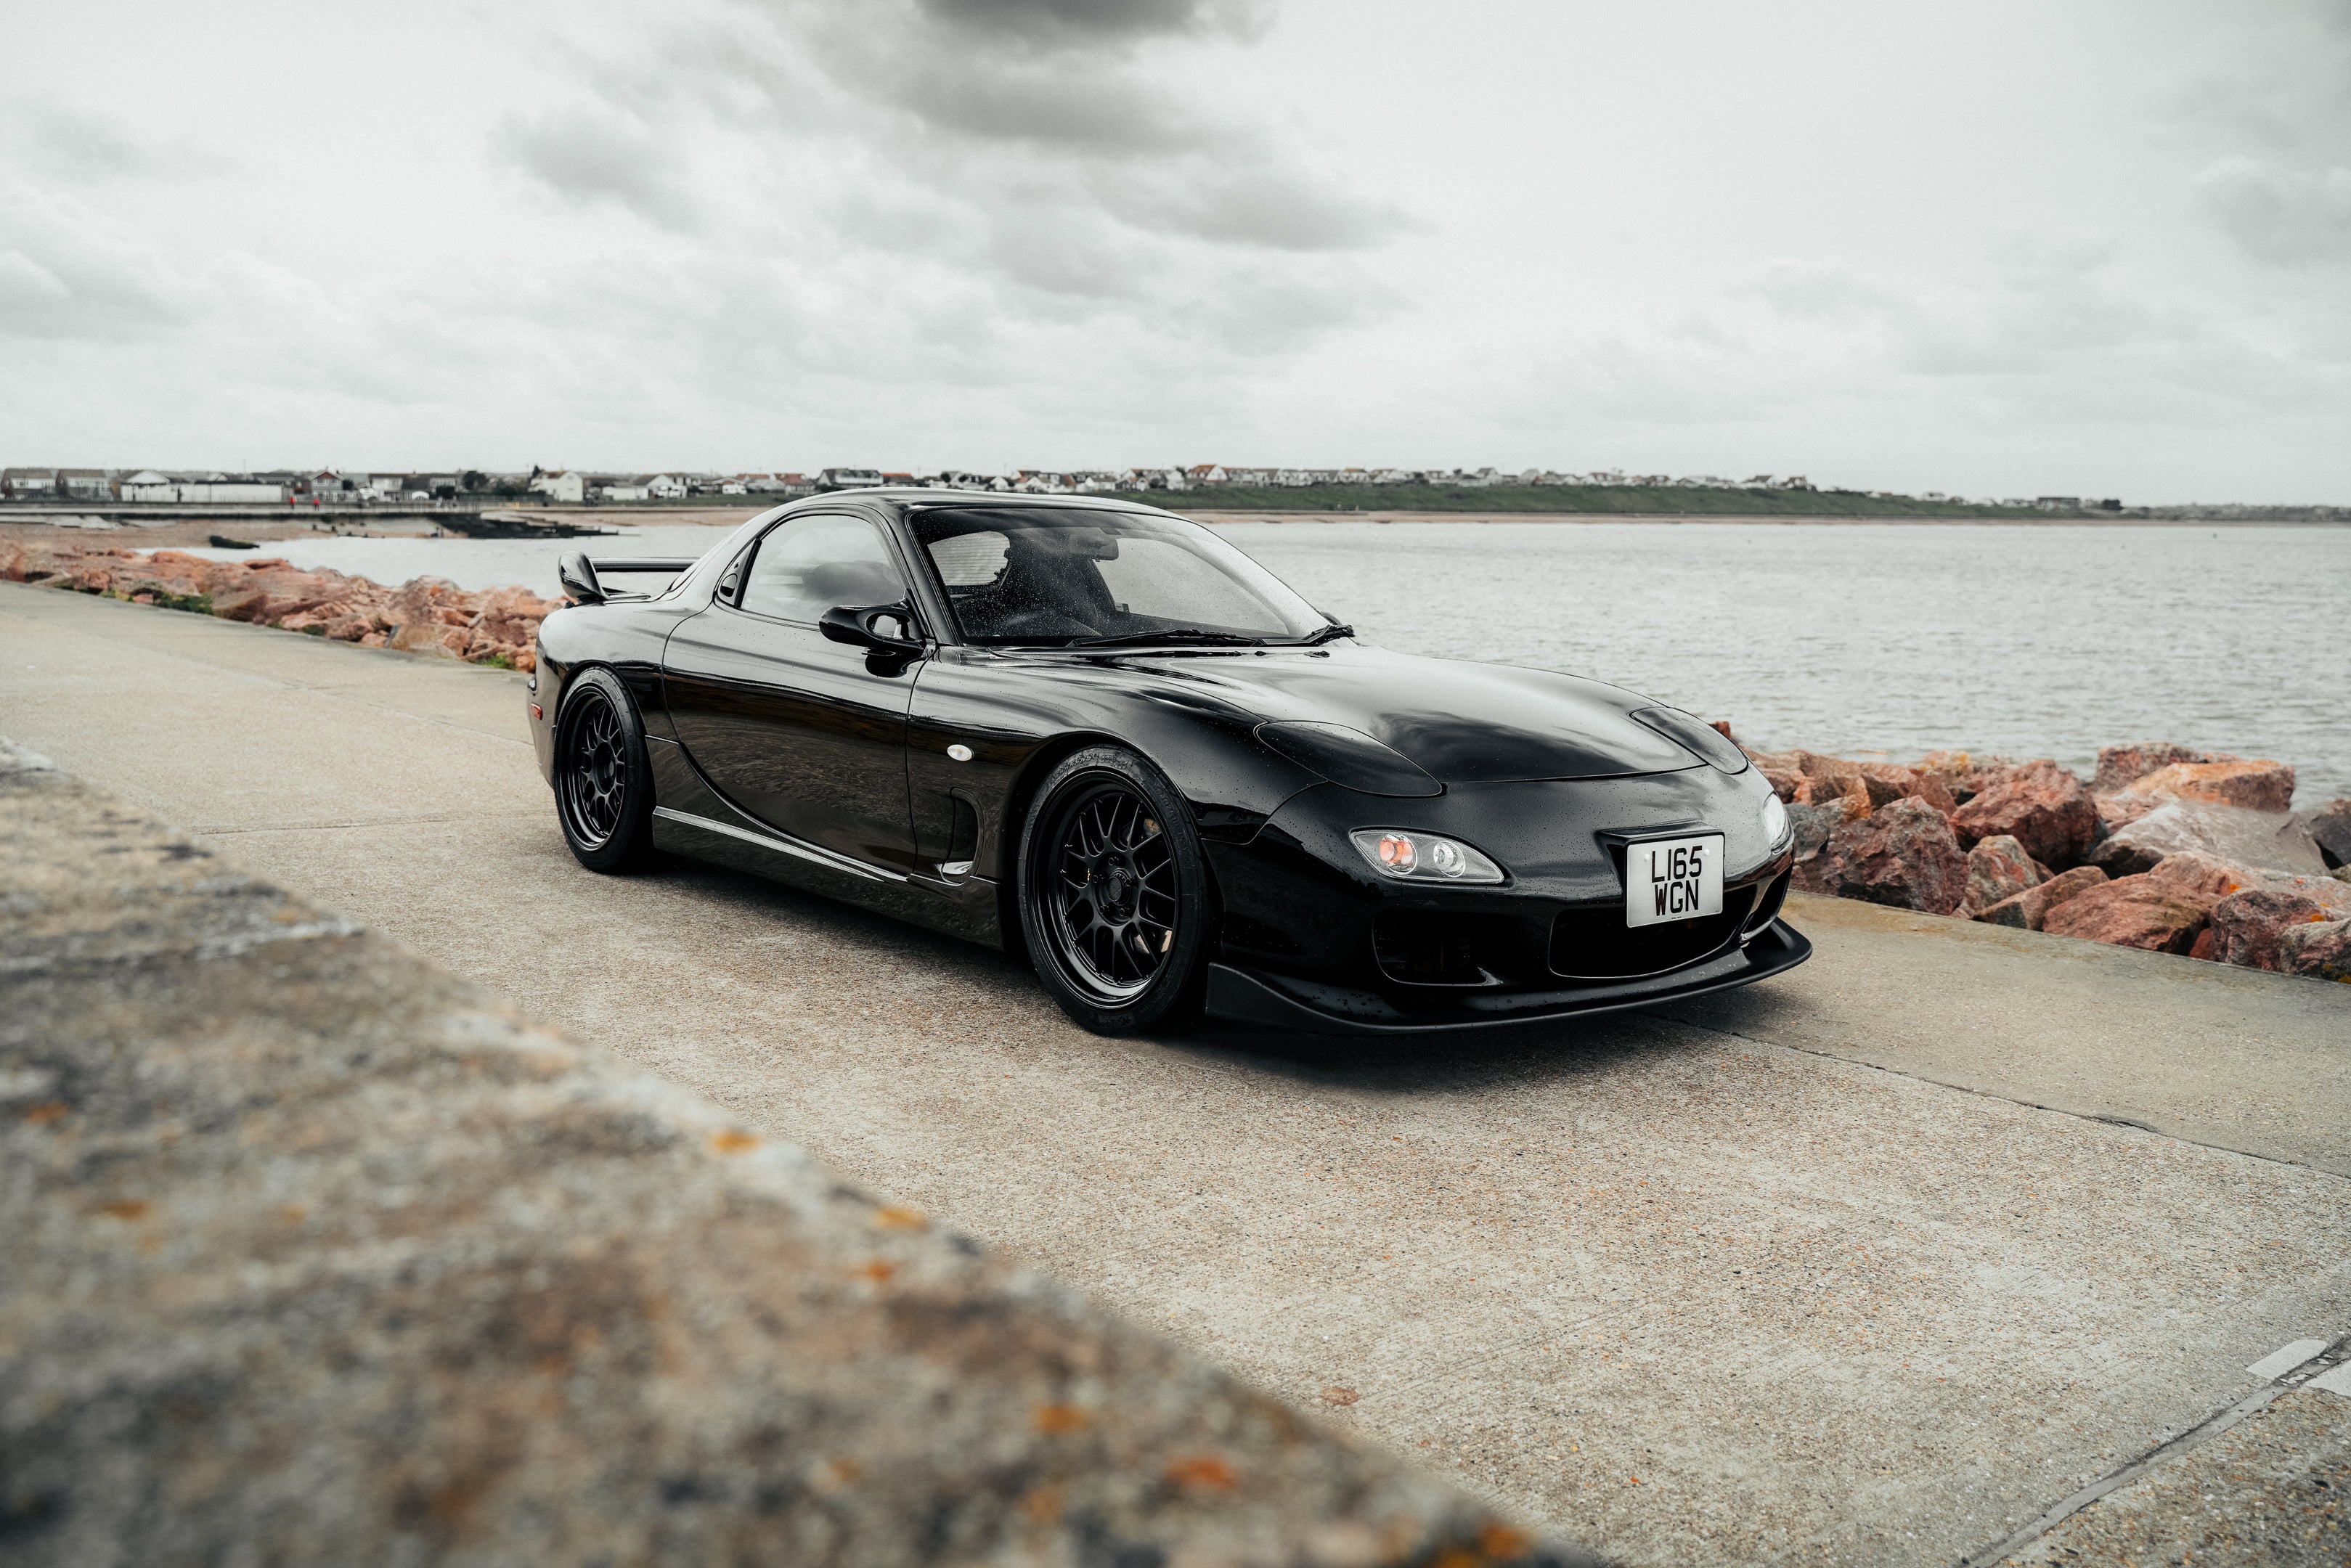 A Big-Turbo 1994 Mazda RX-7 is Ready for the Tuner Car Nostalgia